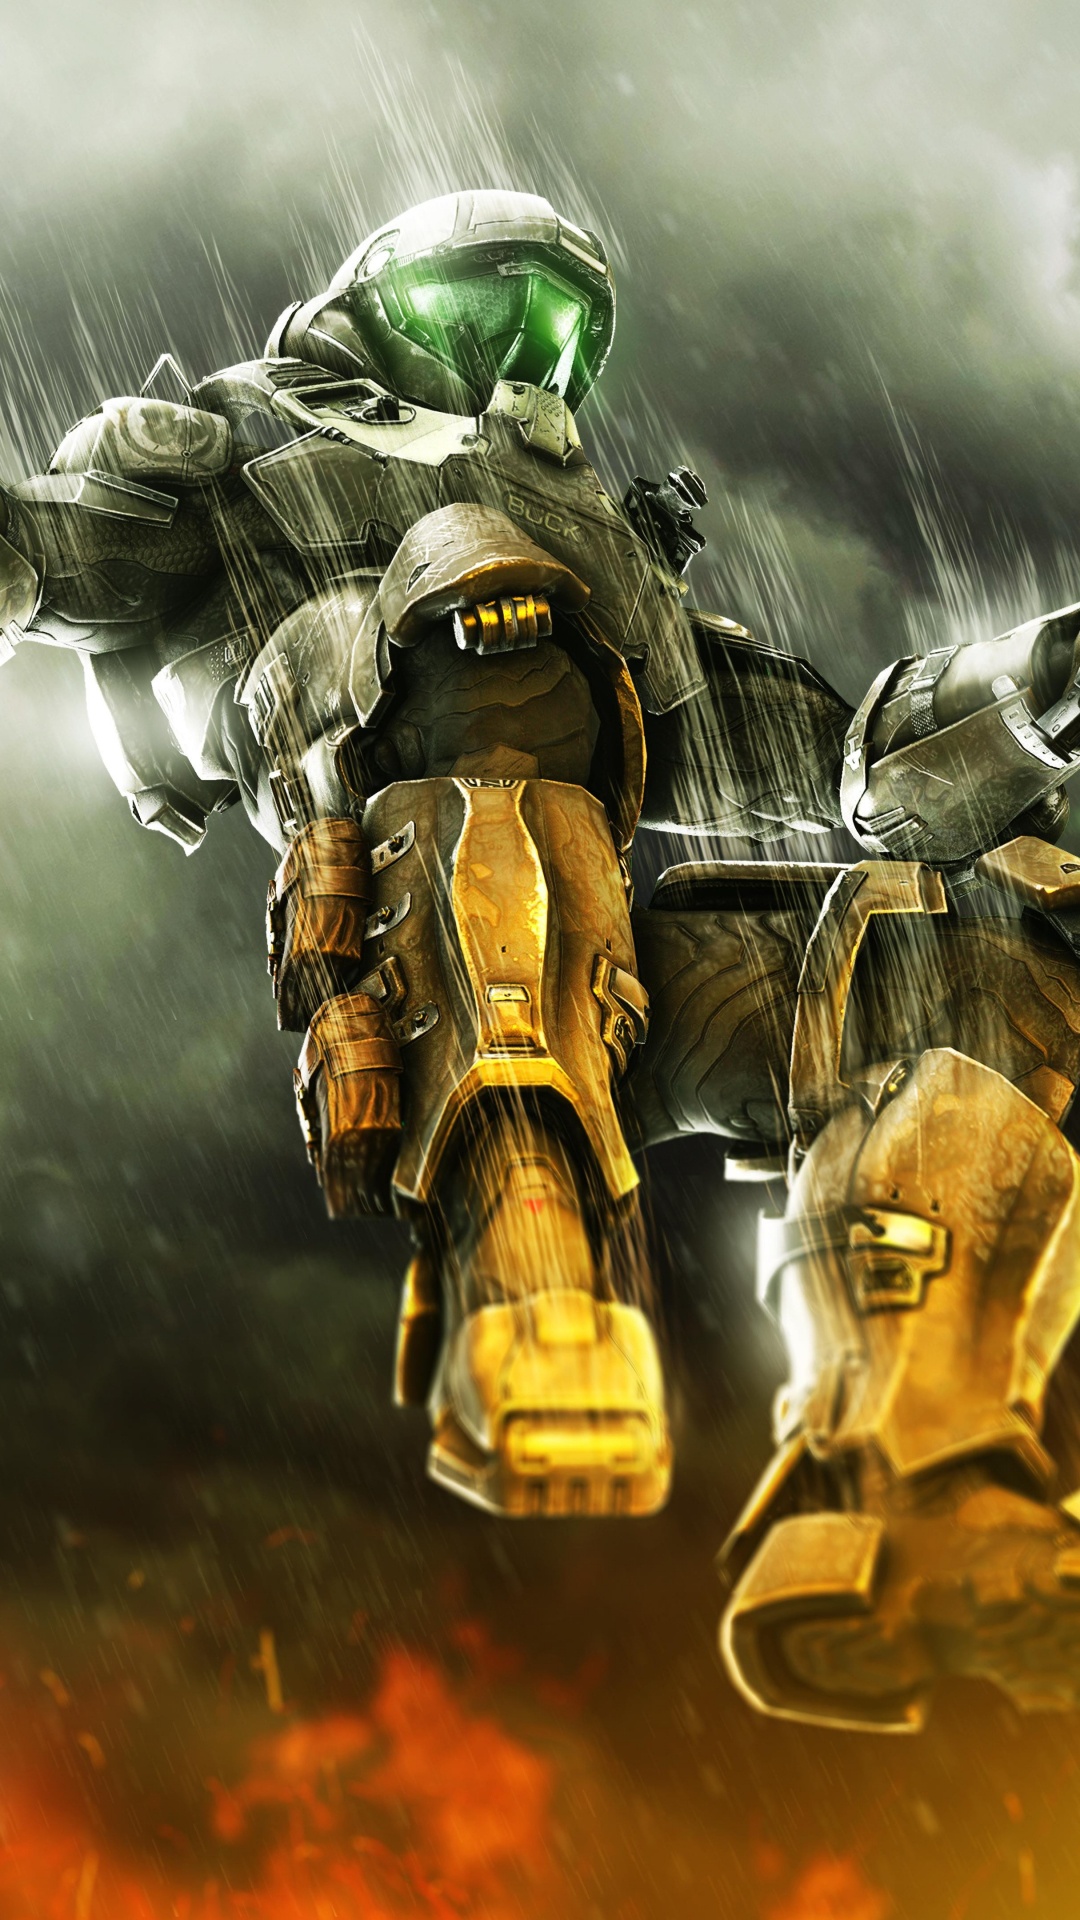 Halo 3, Master Chief, pc Game, Freestyle Motocross, Motocross. Wallpaper in 1080x1920 Resolution